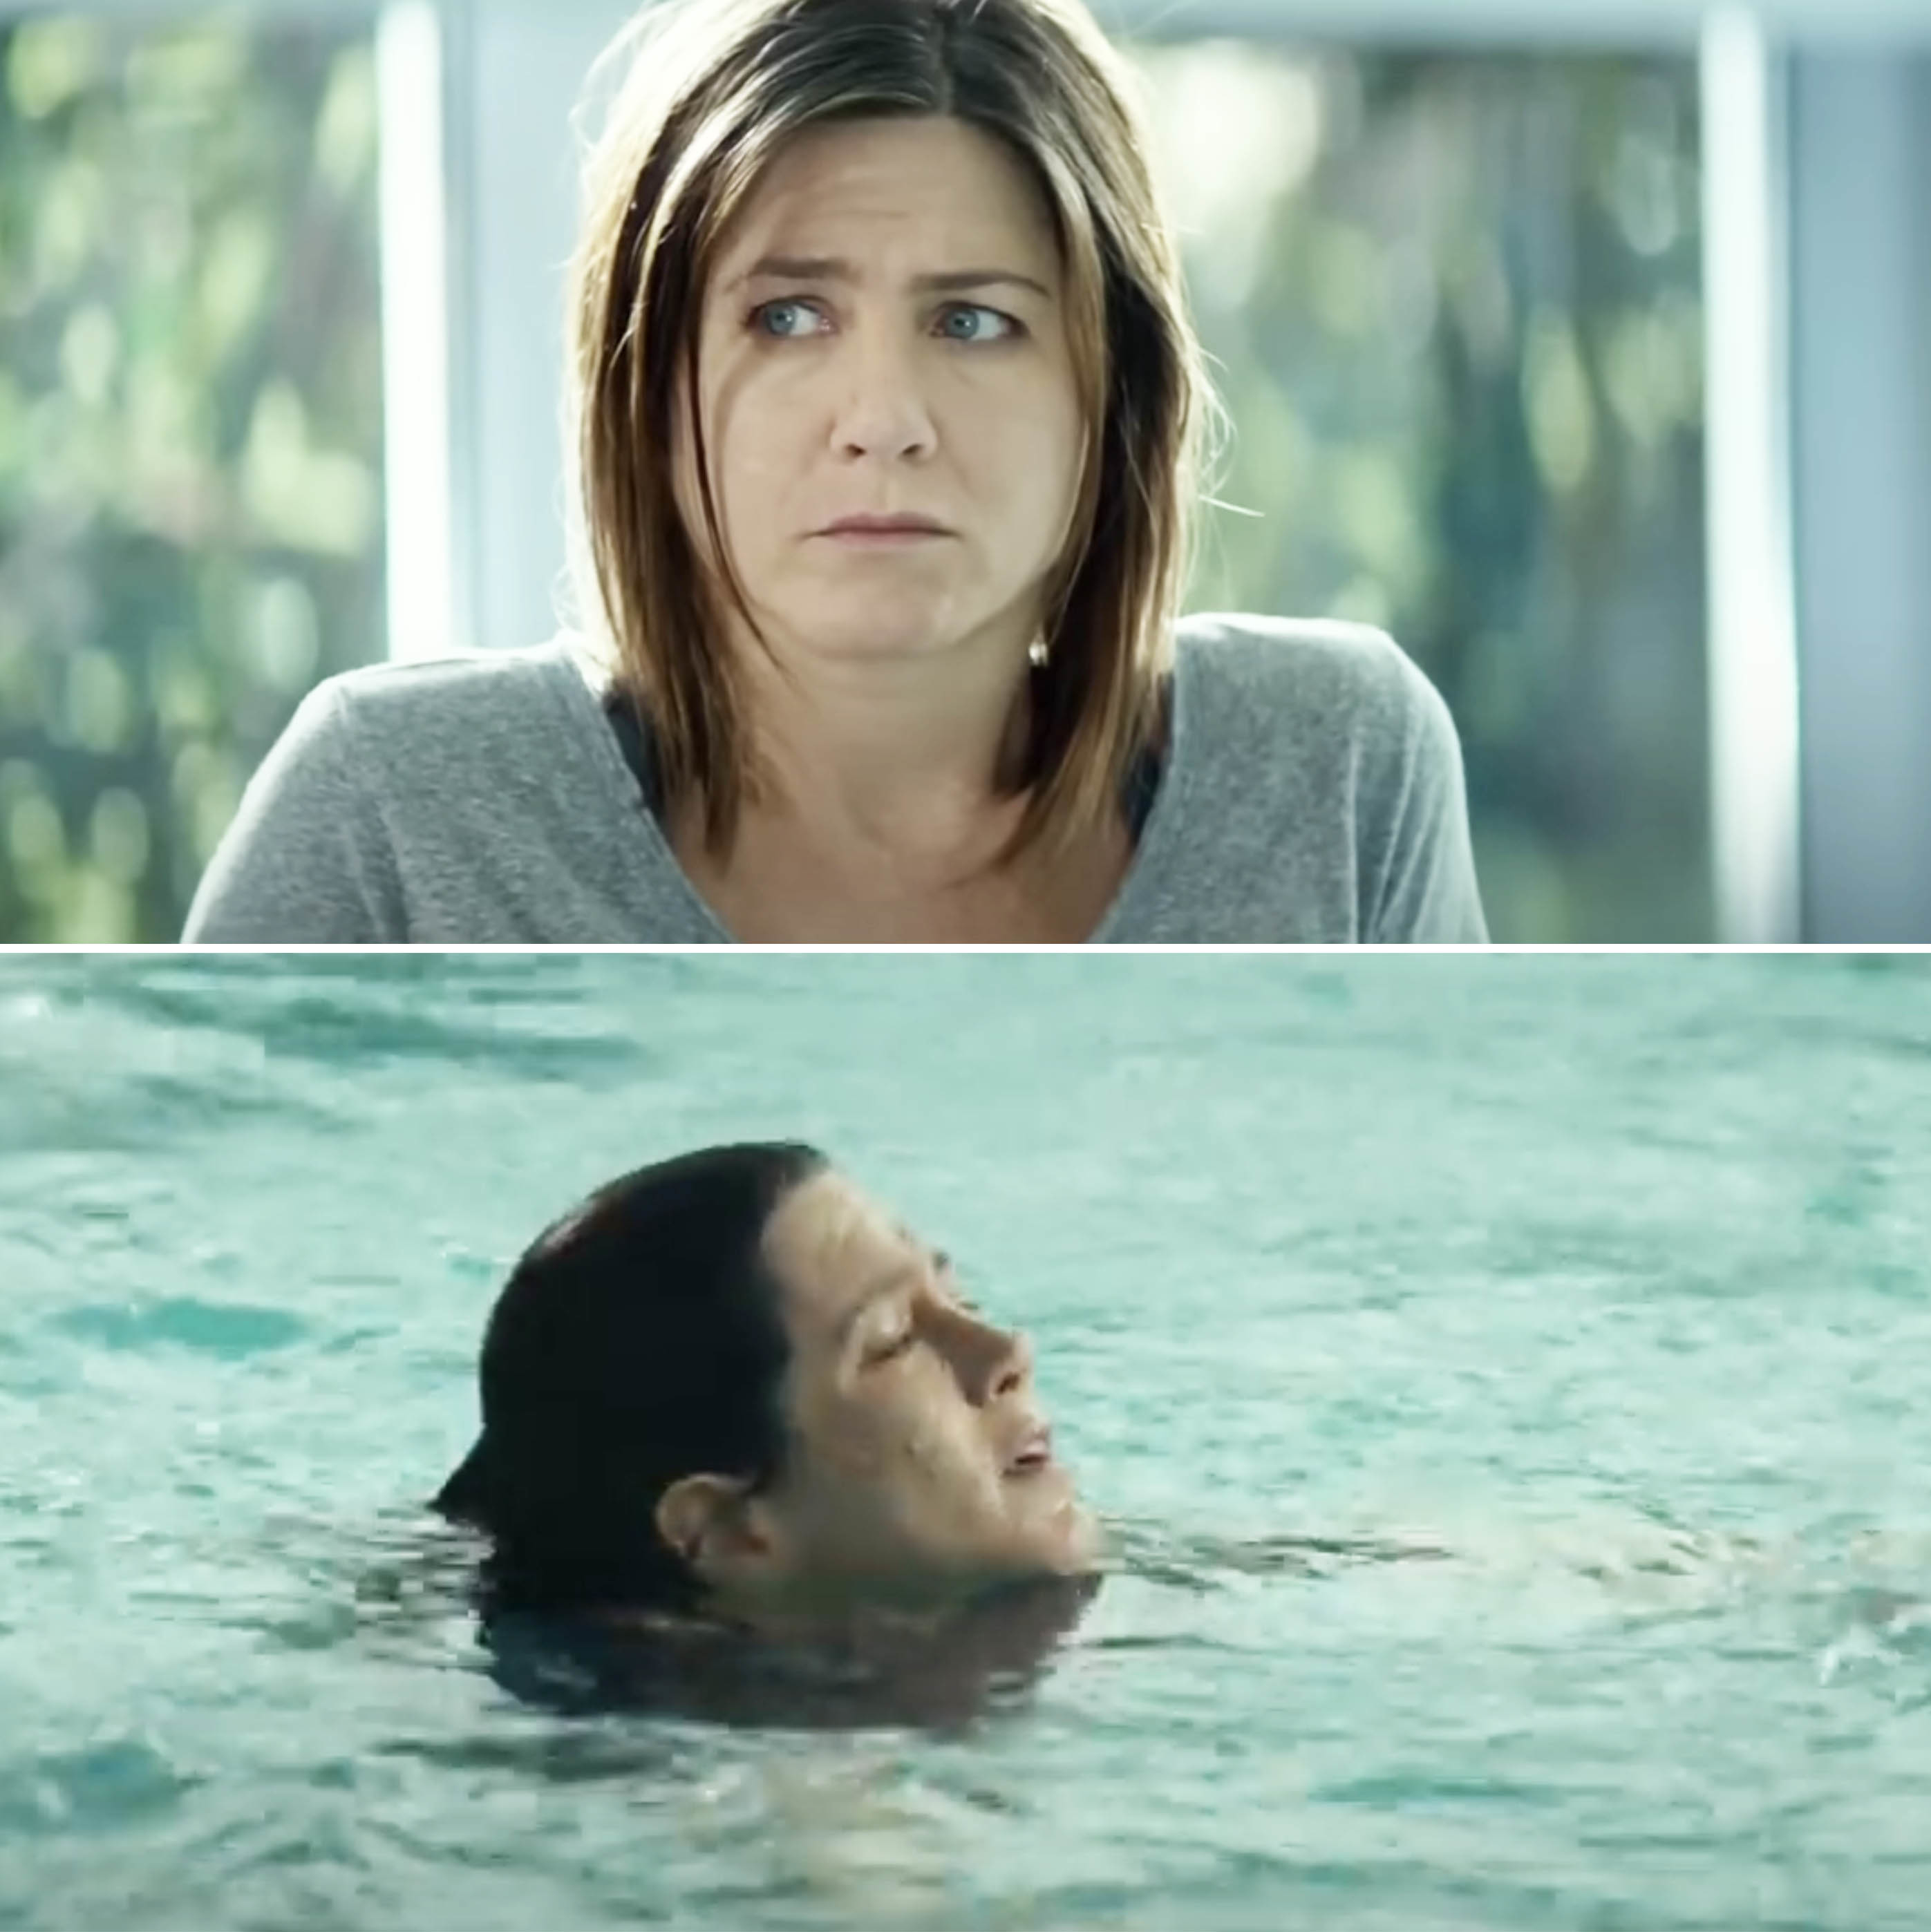 Jennifer Aniston with a concerned expression; bottom shows her character swimming